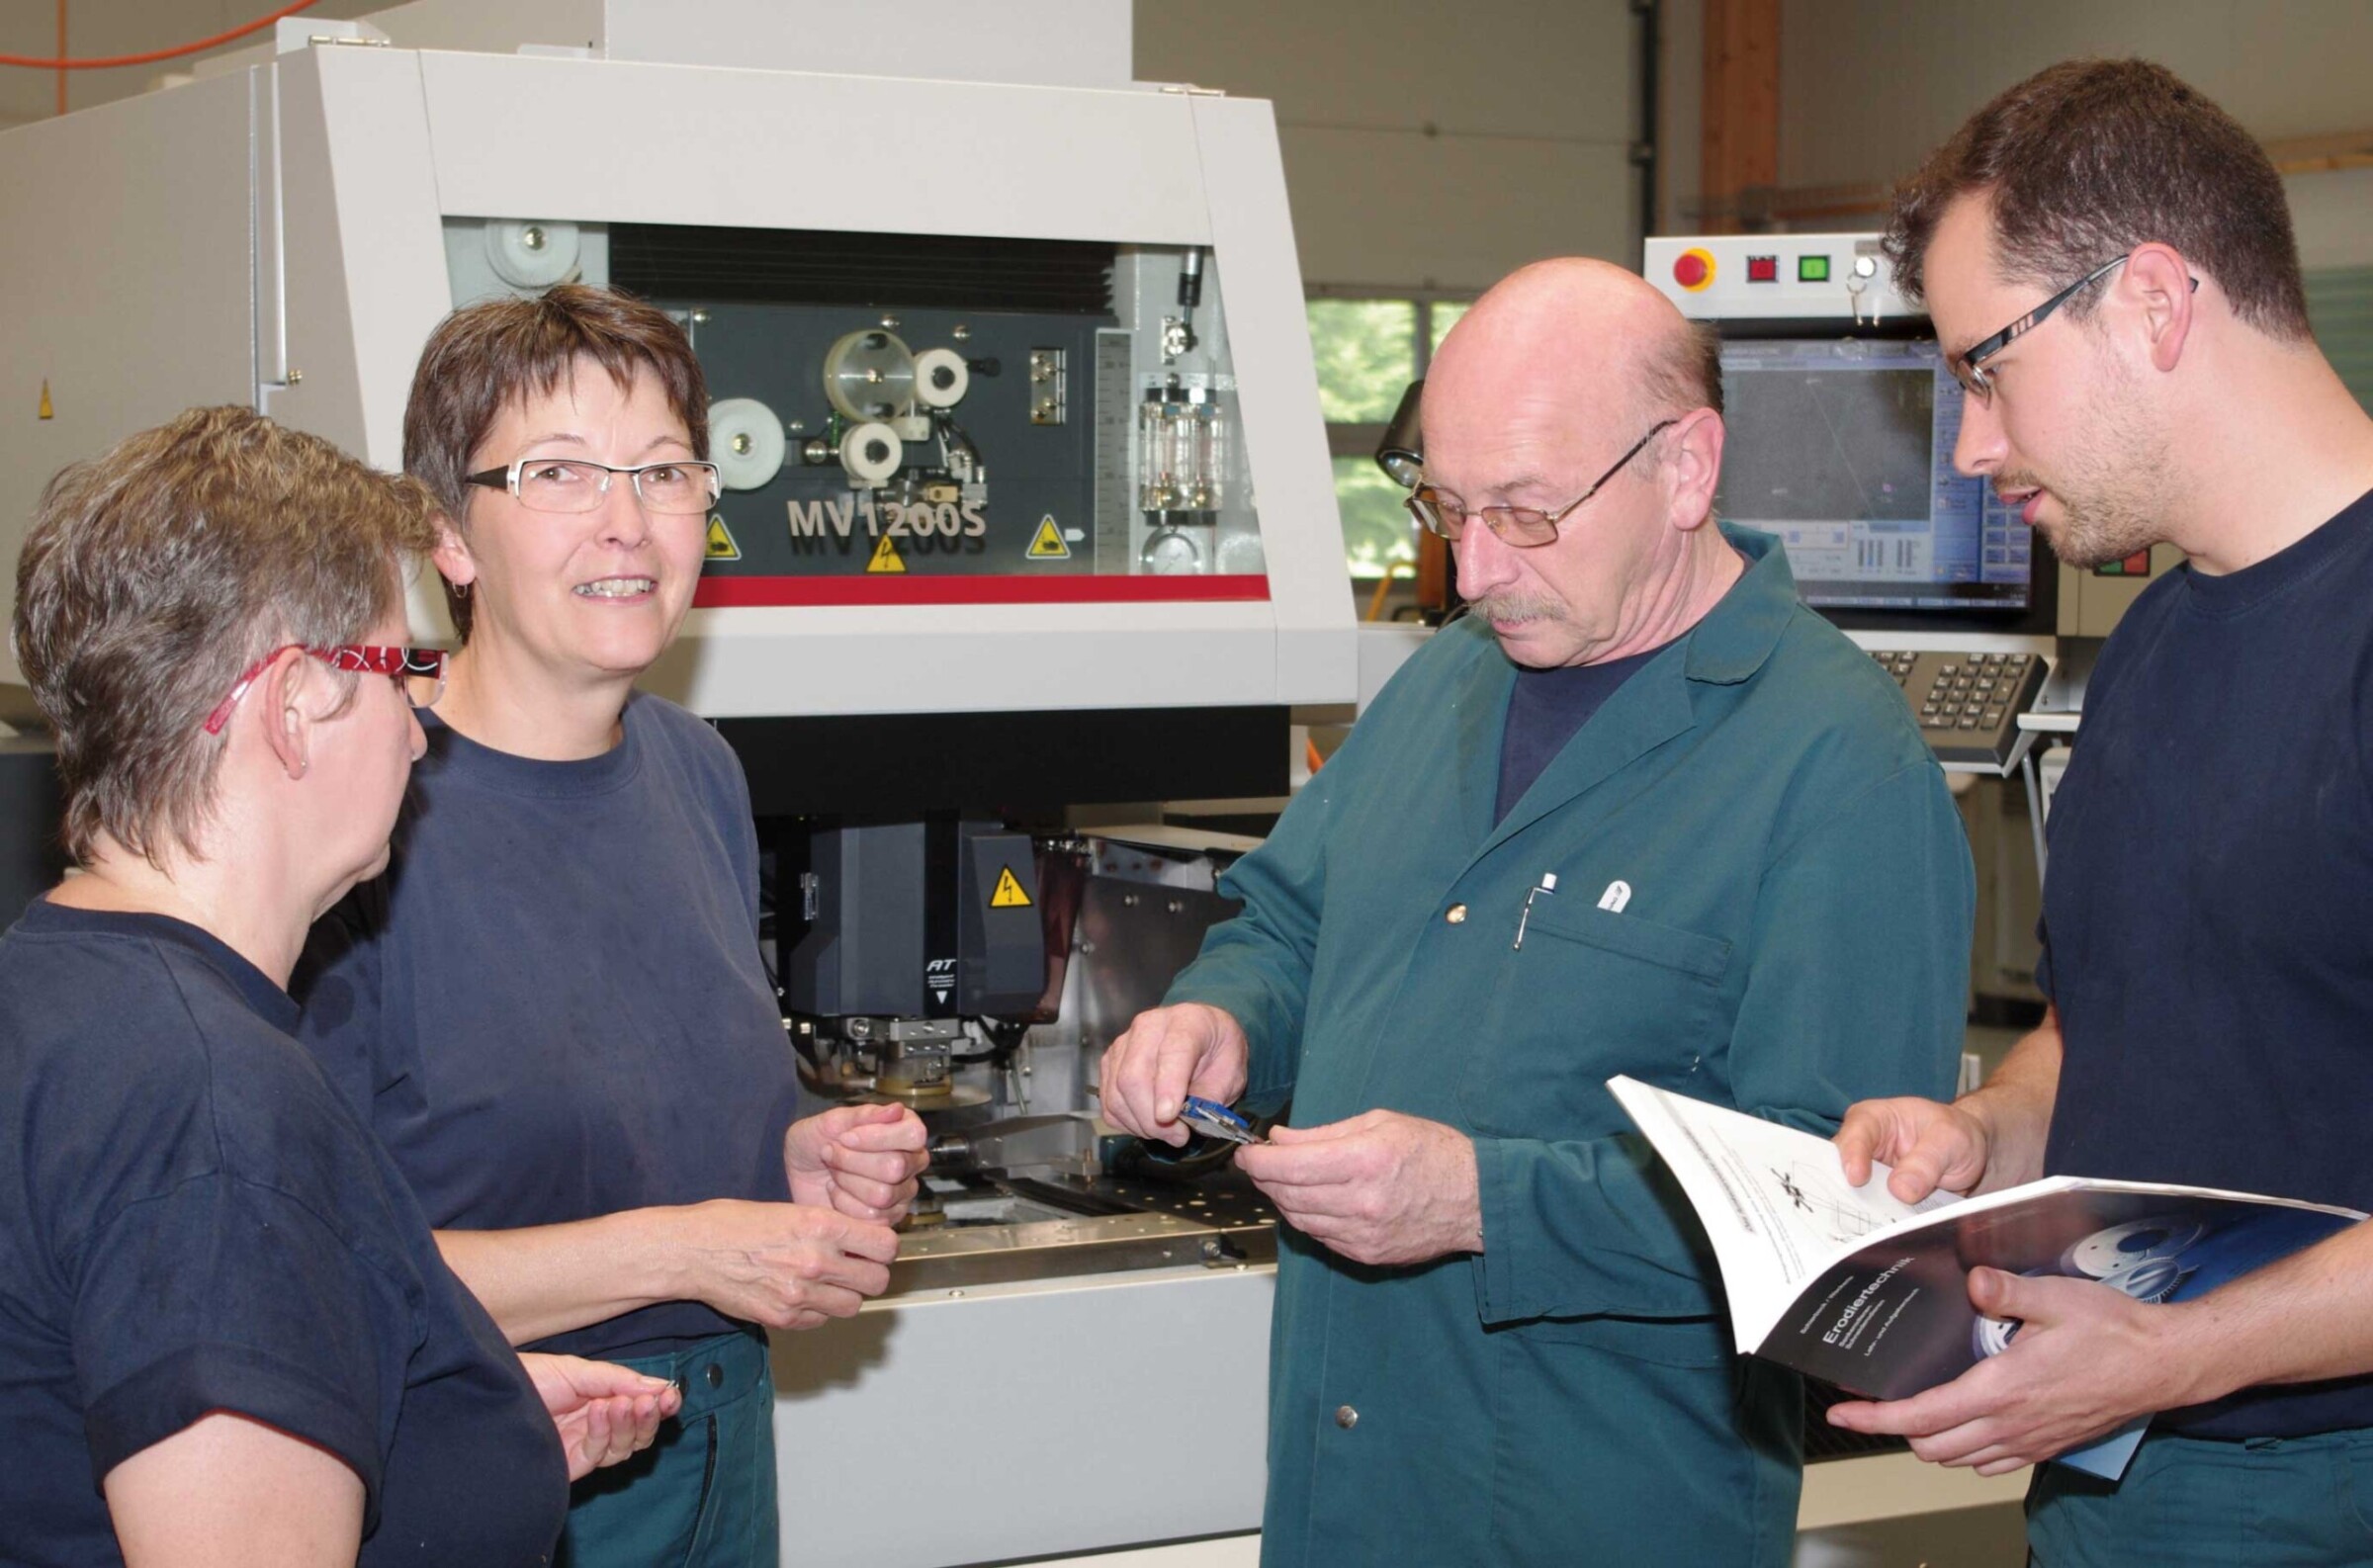 At Huber Präzisionsmechanik AG, a family business in Besenbüren, (from right to left) son Daniel, father Felix and mother Olivia and the outside employee are impressed by the quality of the MV1200S wire-cut EDM machine.